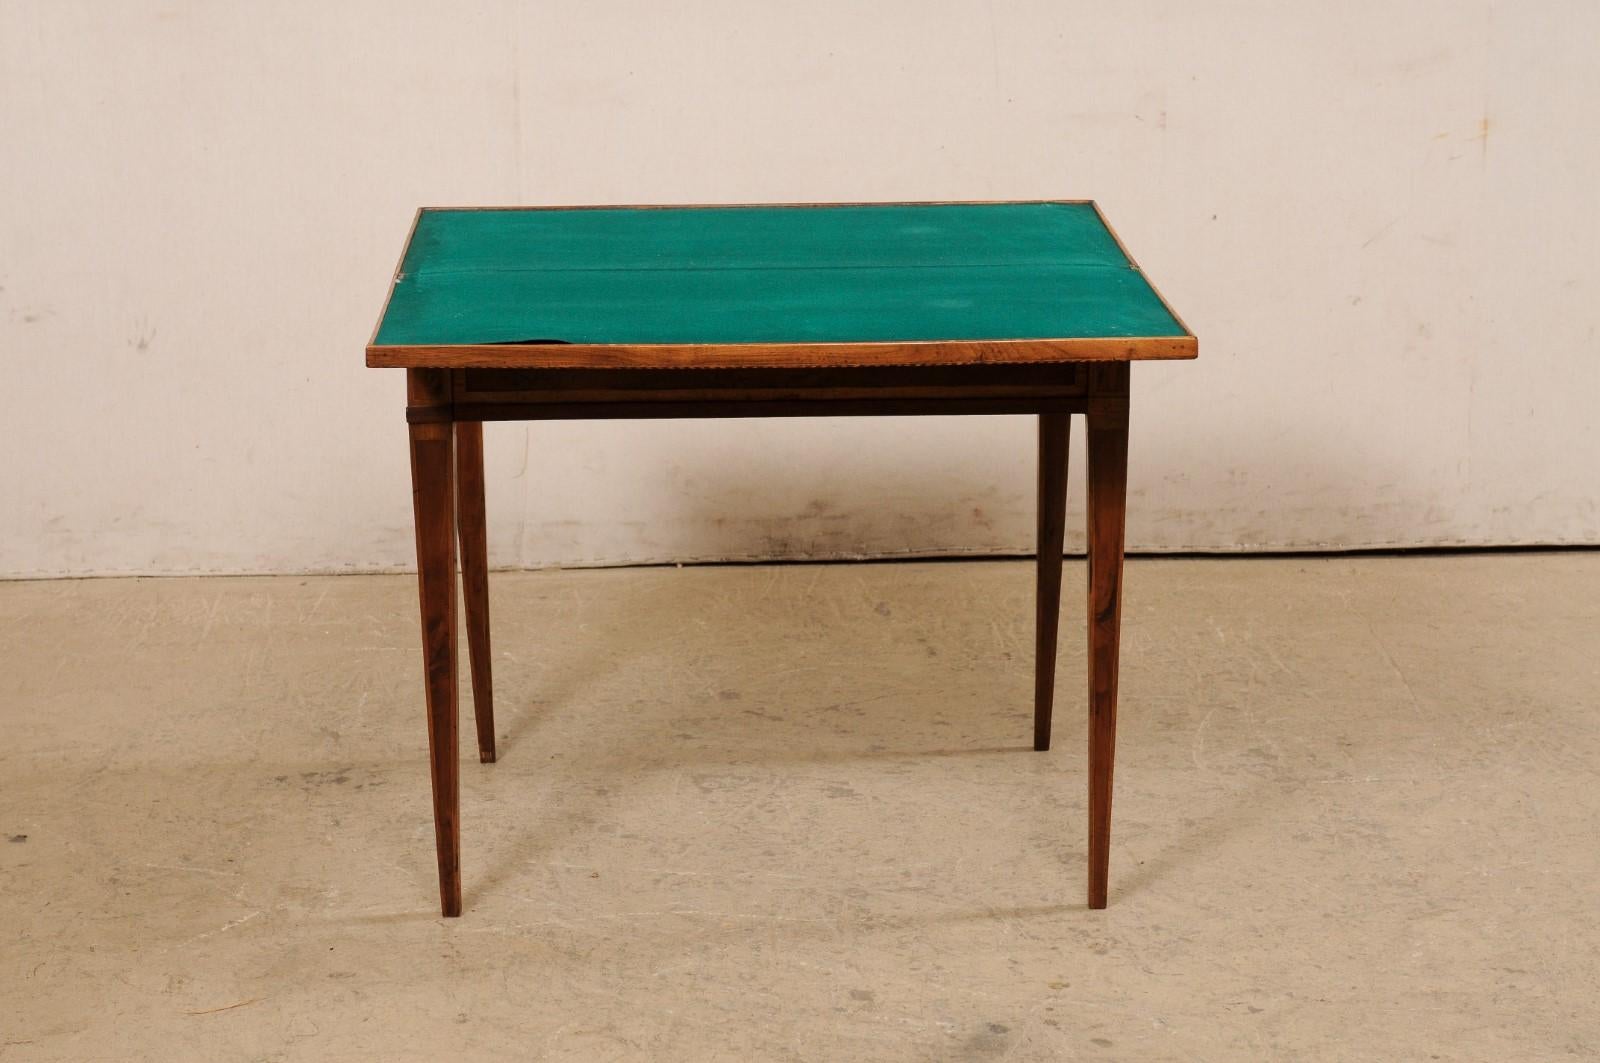 19th C. French Petite-Size Flip Top Table 'Transitional to a Card/Games Table' For Sale 3